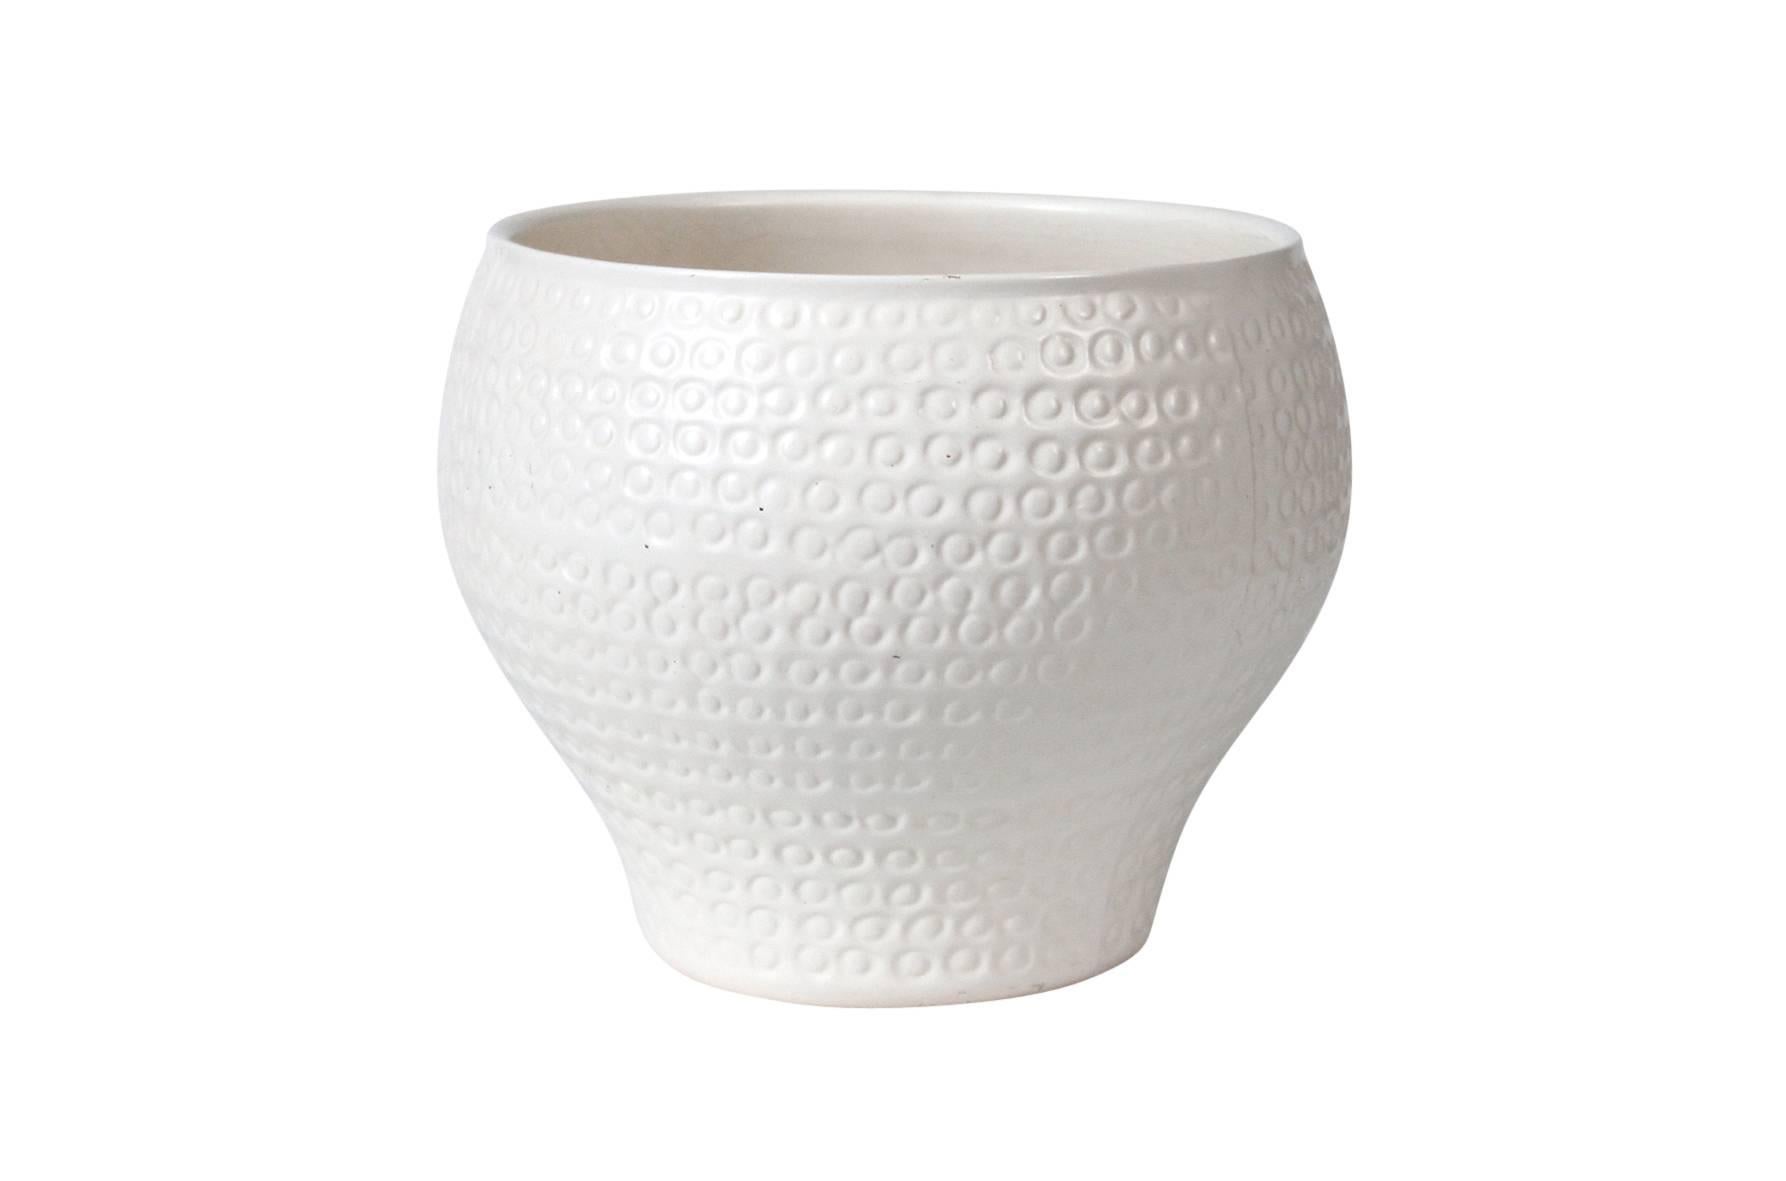 White ceramic planter by California potter David Cressey. This dimpled design is for the 